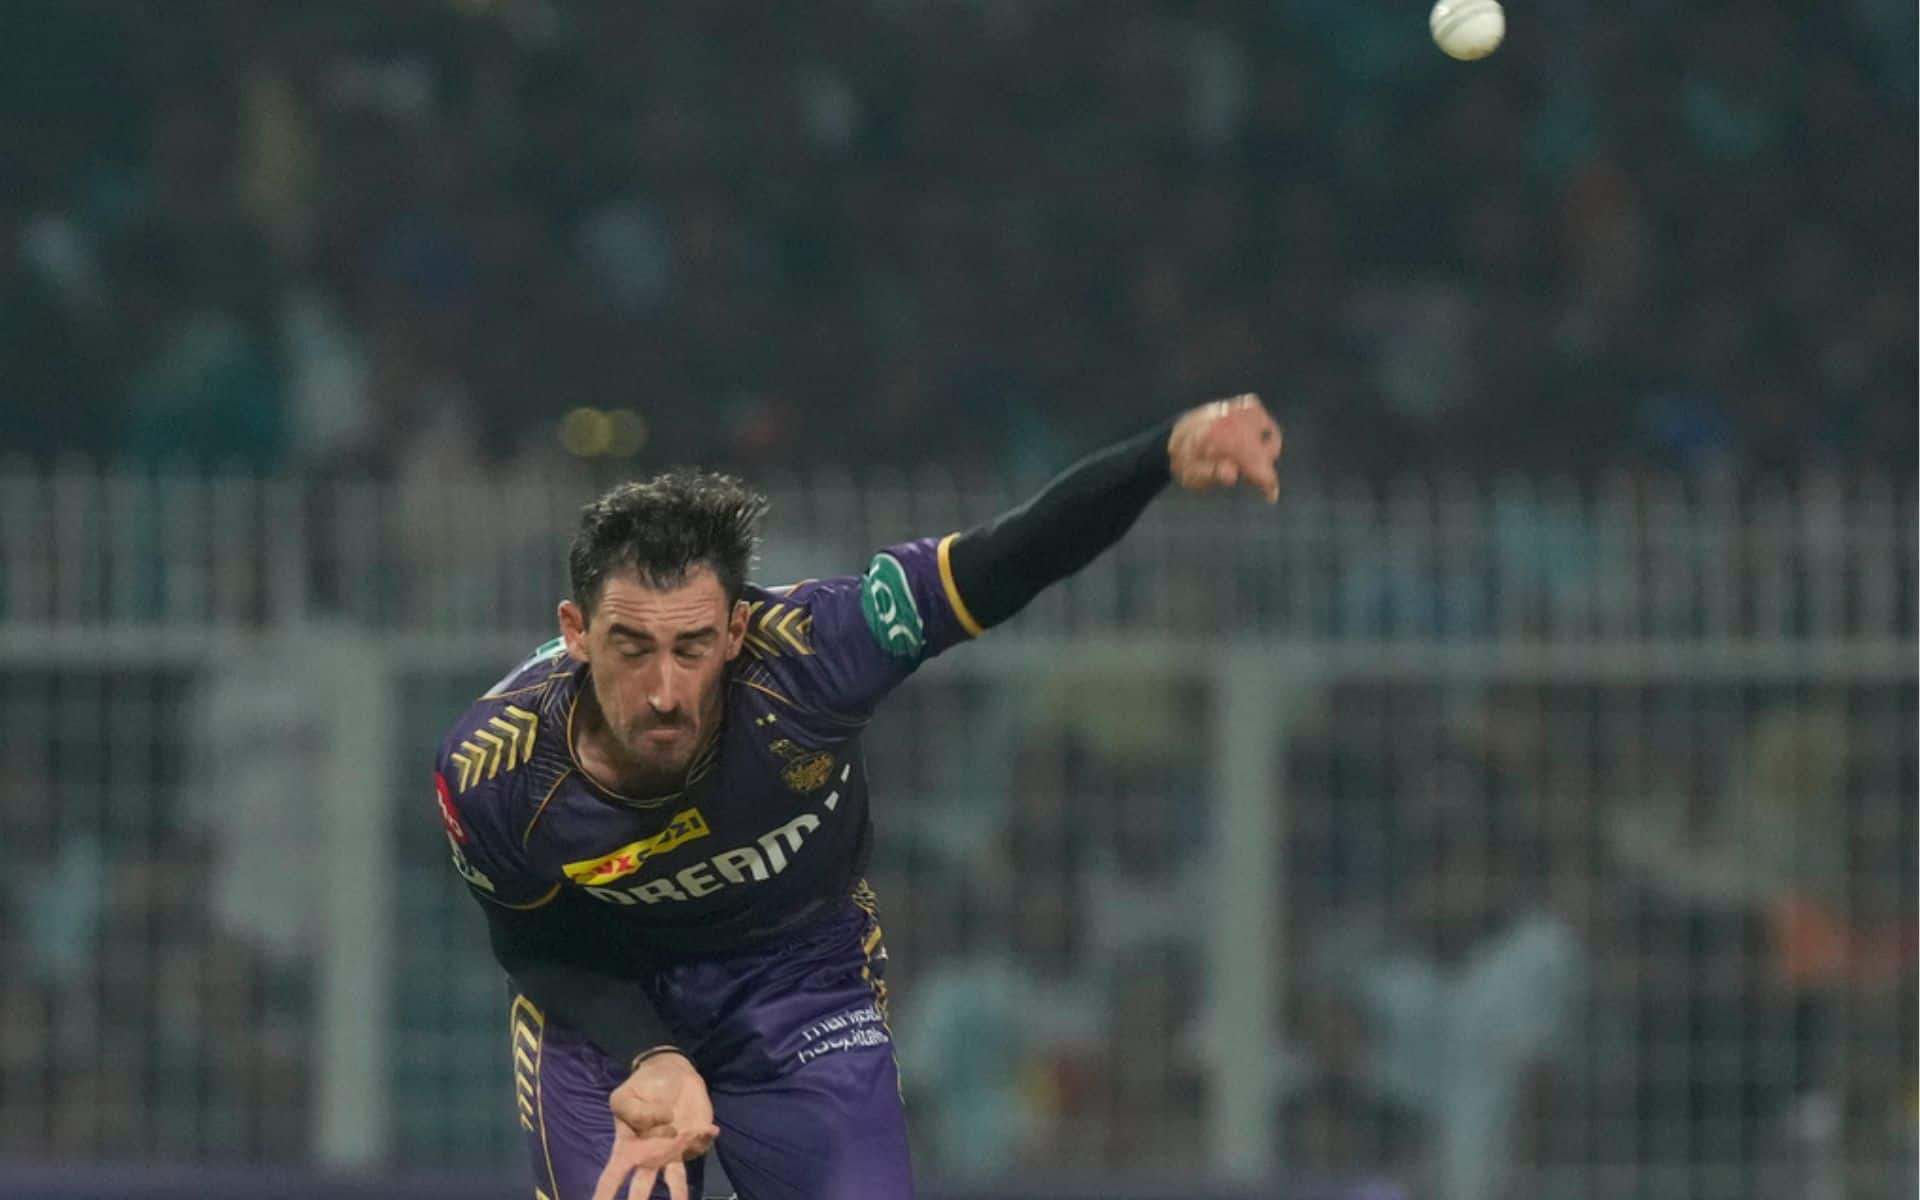 Mitchell Starc could be an important player for KKR in the match vs DC [iplt20.com]